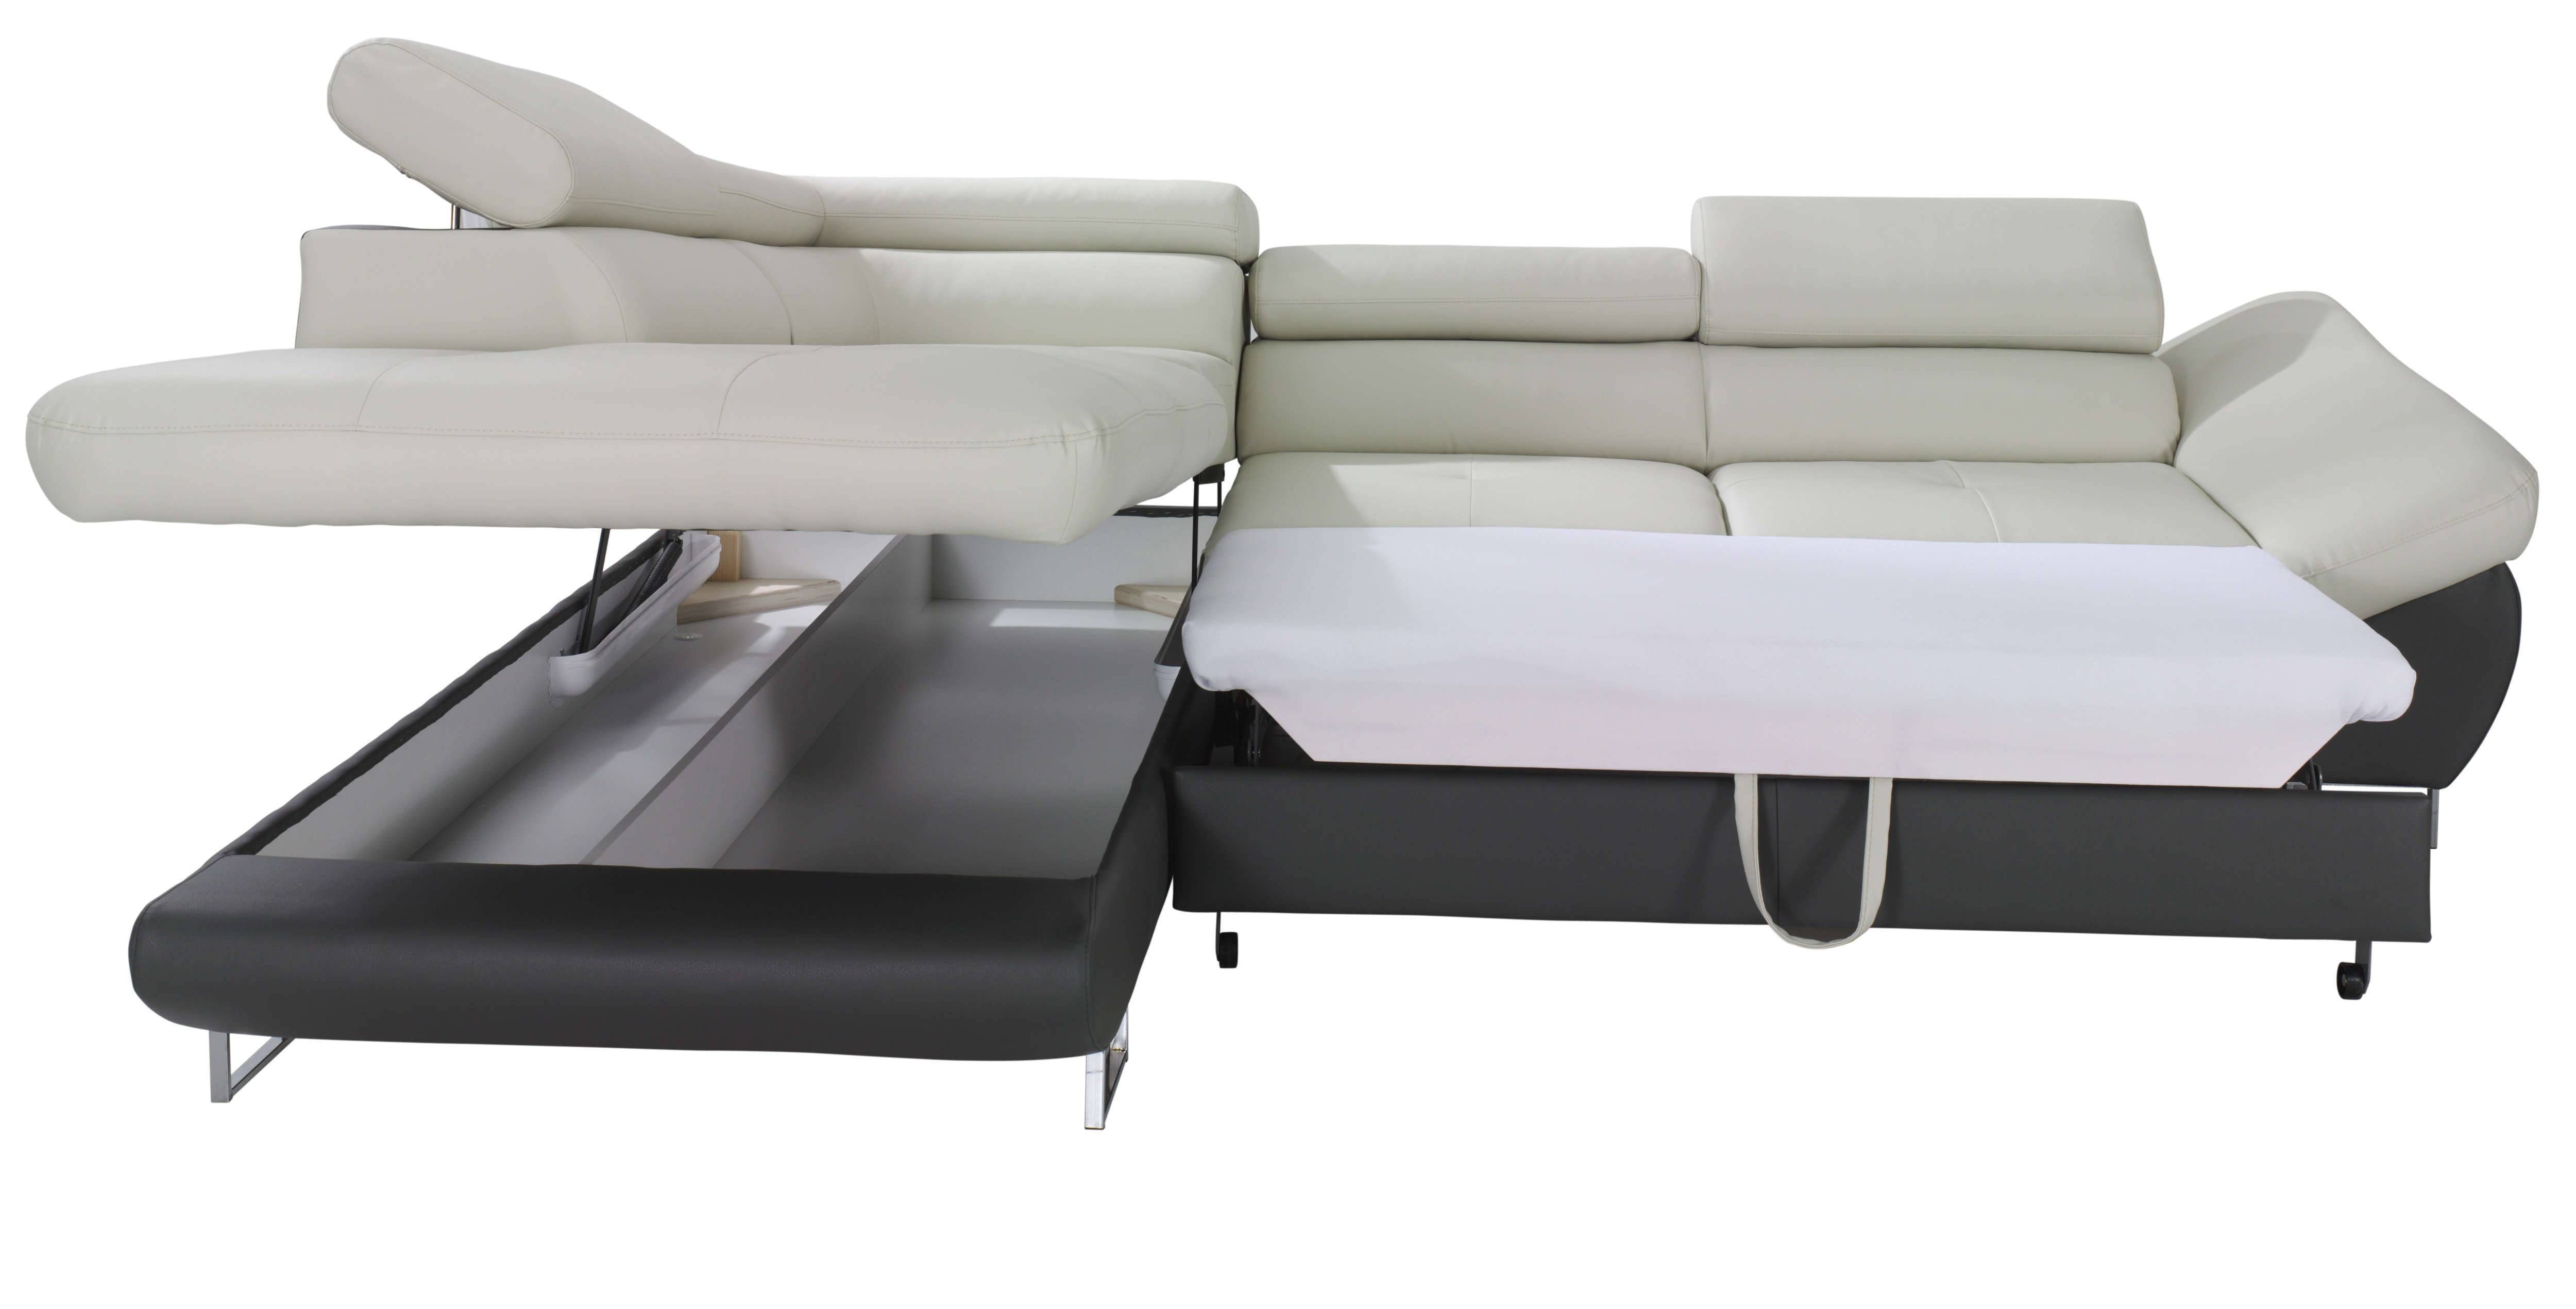 Fabio Sectional Sofa Sleeper With Storage | Creative Furniture With Sofa Beds With Chaise Lounge (View 11 of 15)